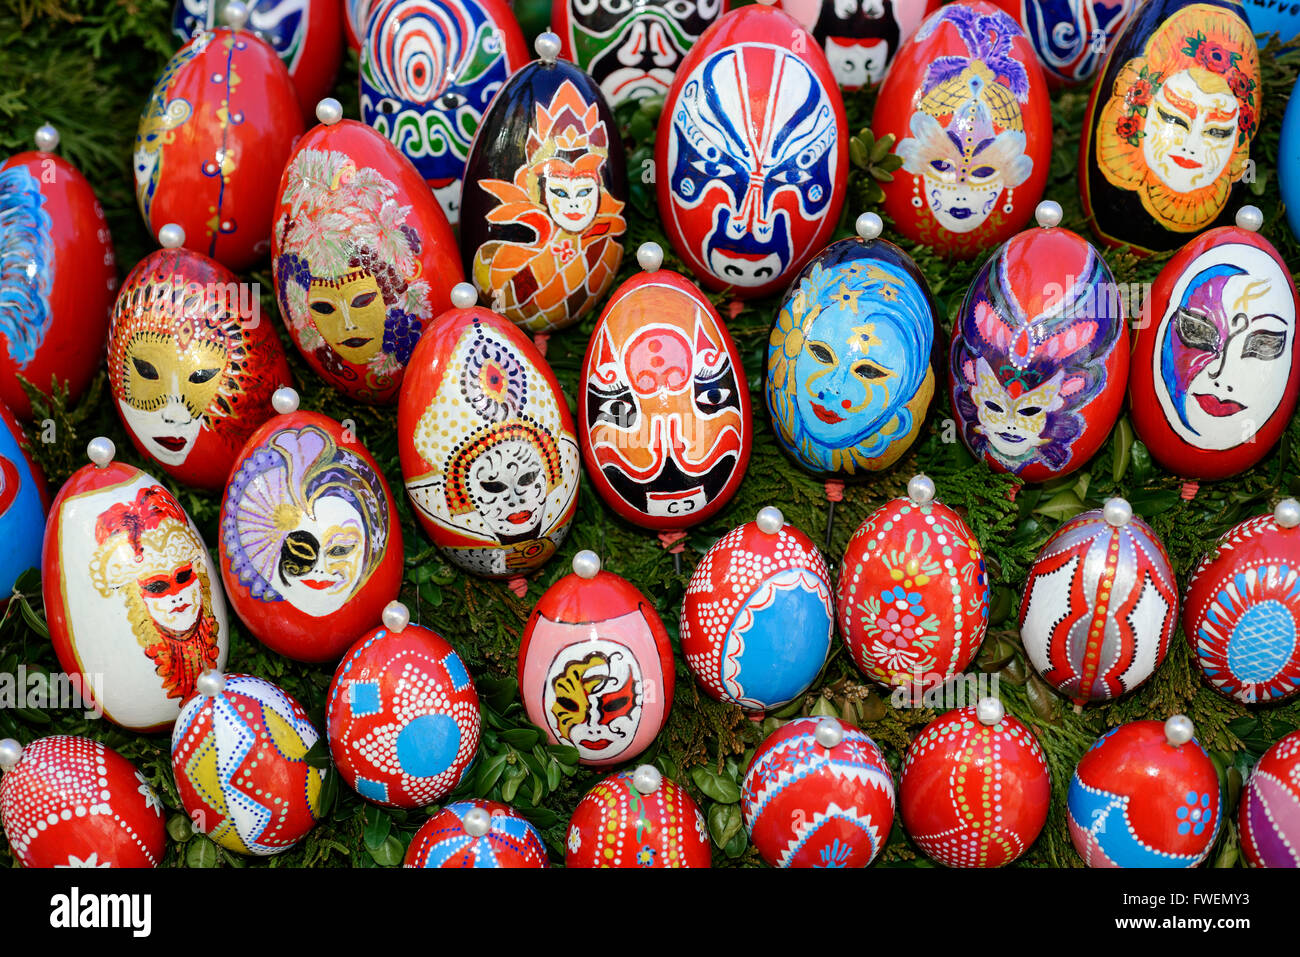 Painted Easter eggs with carnival masks on an Easter well, Osterbrunnen, Schechingen, Baden-Württemberg, Germany Stock Photo